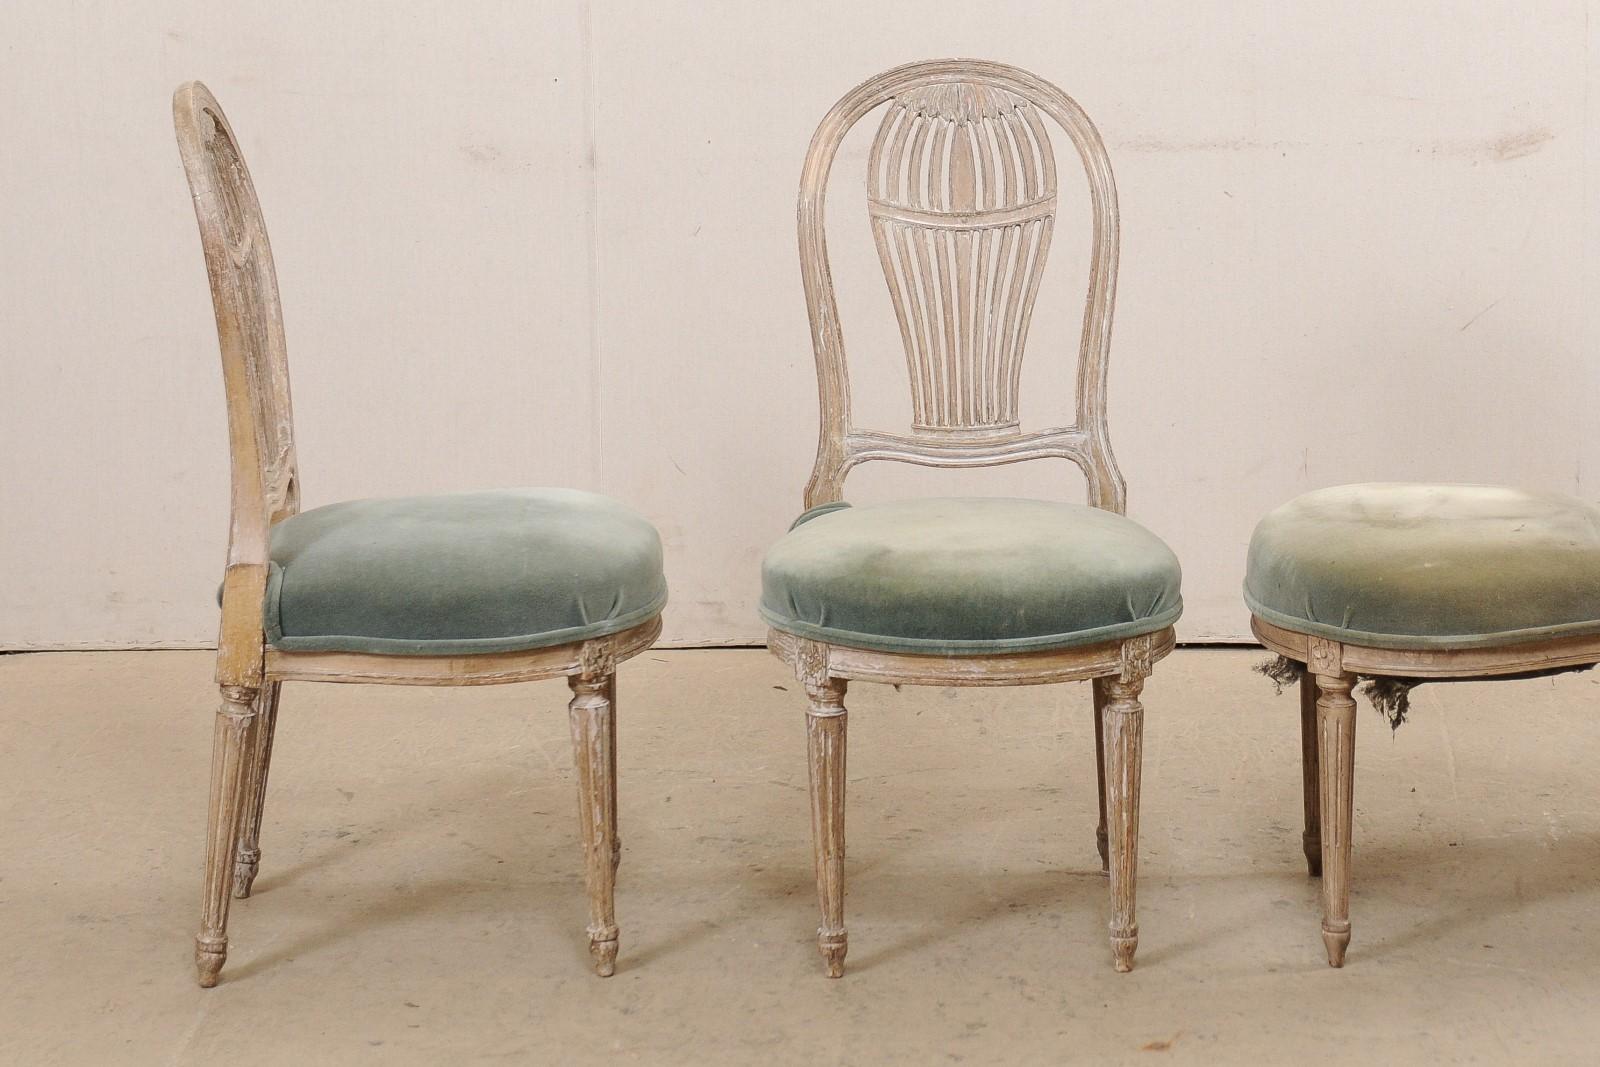 20th Century French Set of 4 Pierce-Carved Balloon-Back Side Chairs, Jansen-Style